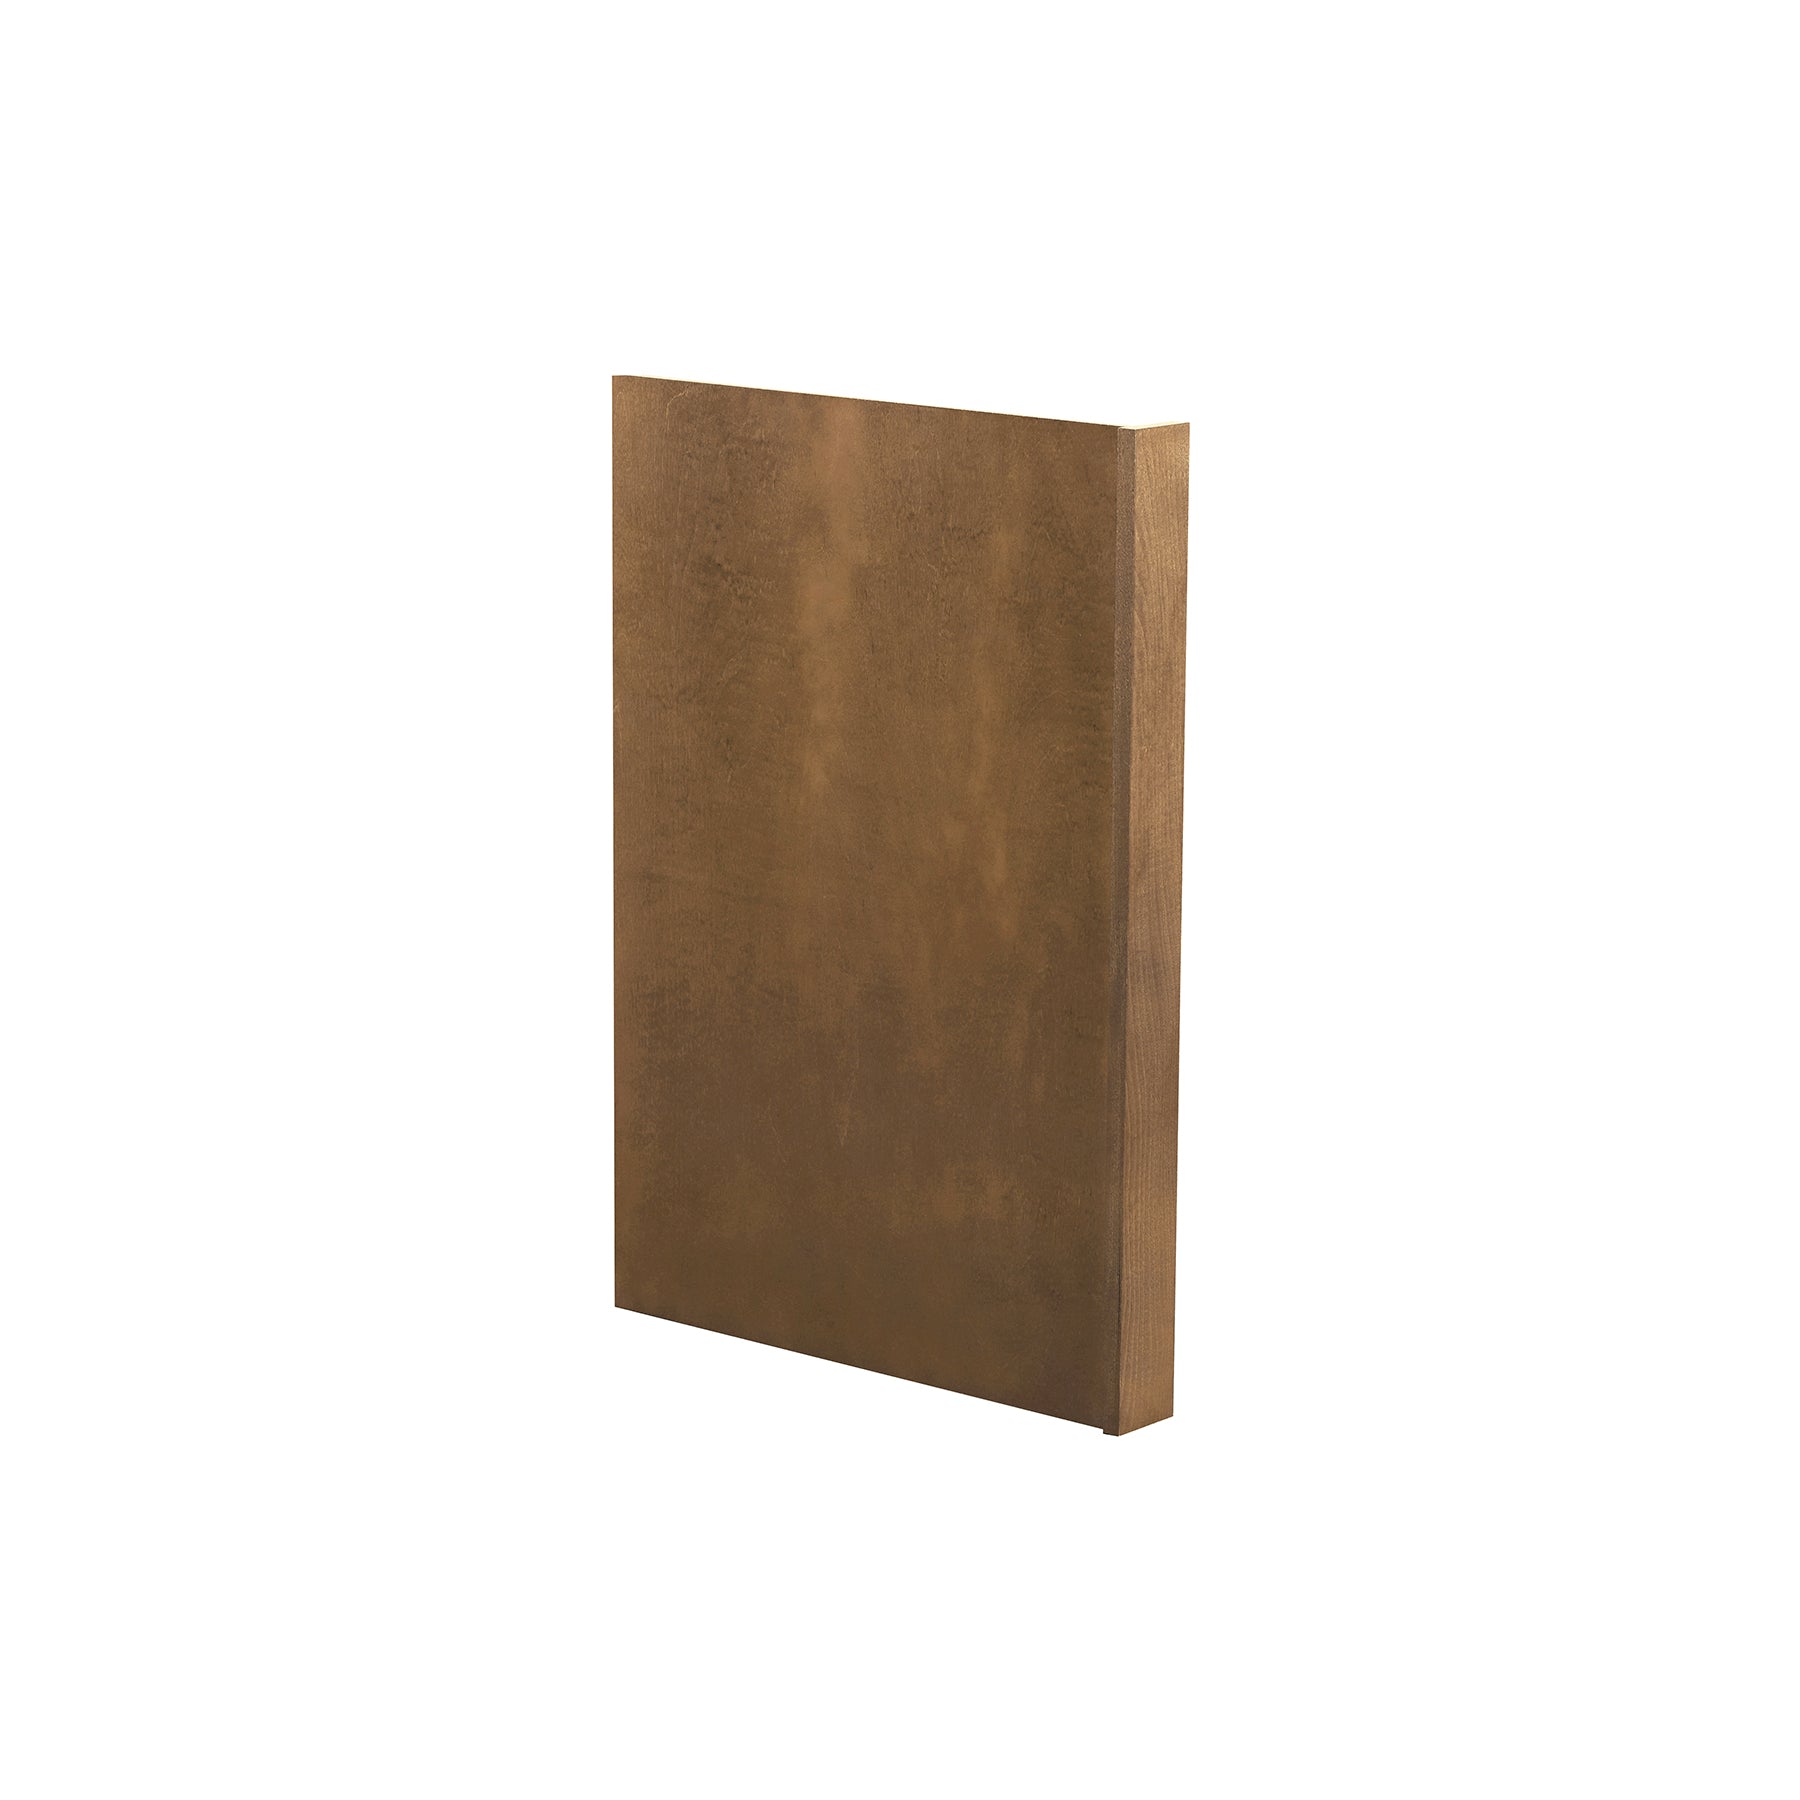 Refrigerator End Panel Faced with 1.5 Inch stile- 1/2 Inch x 24 Inch x 90 Inch - Warmwood Shaker - Kitchen Cabinet